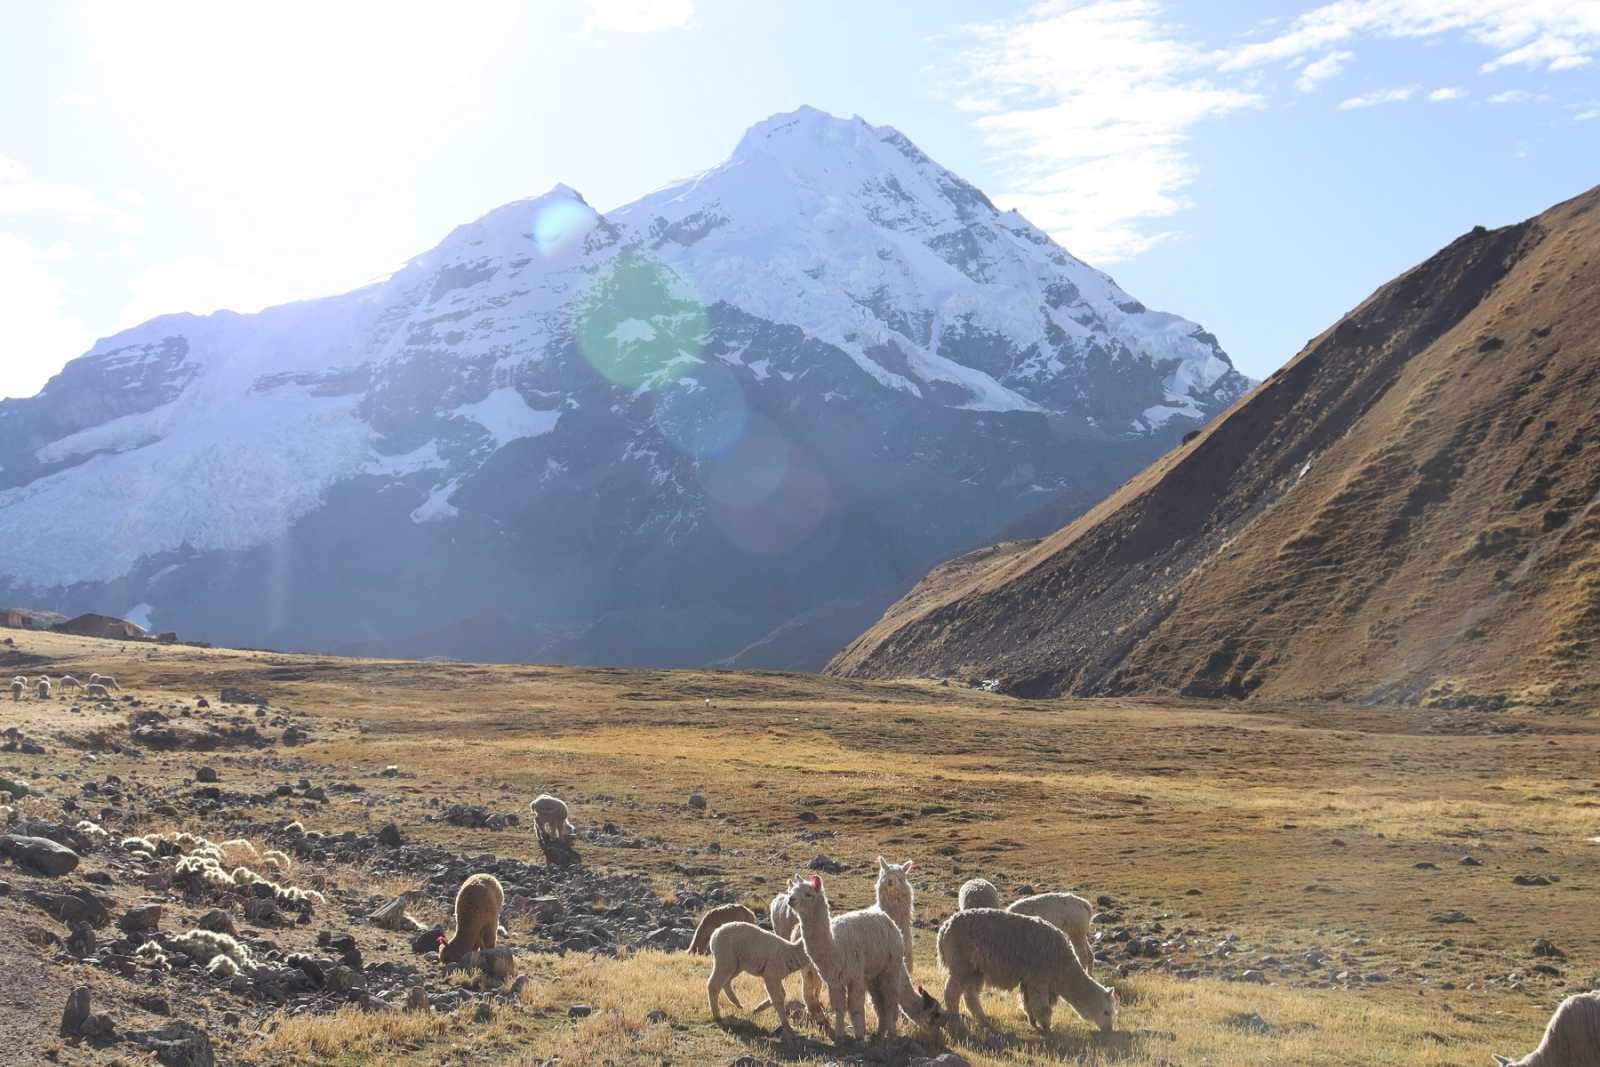 Alpacas in Ausangate is an icon of the Andes